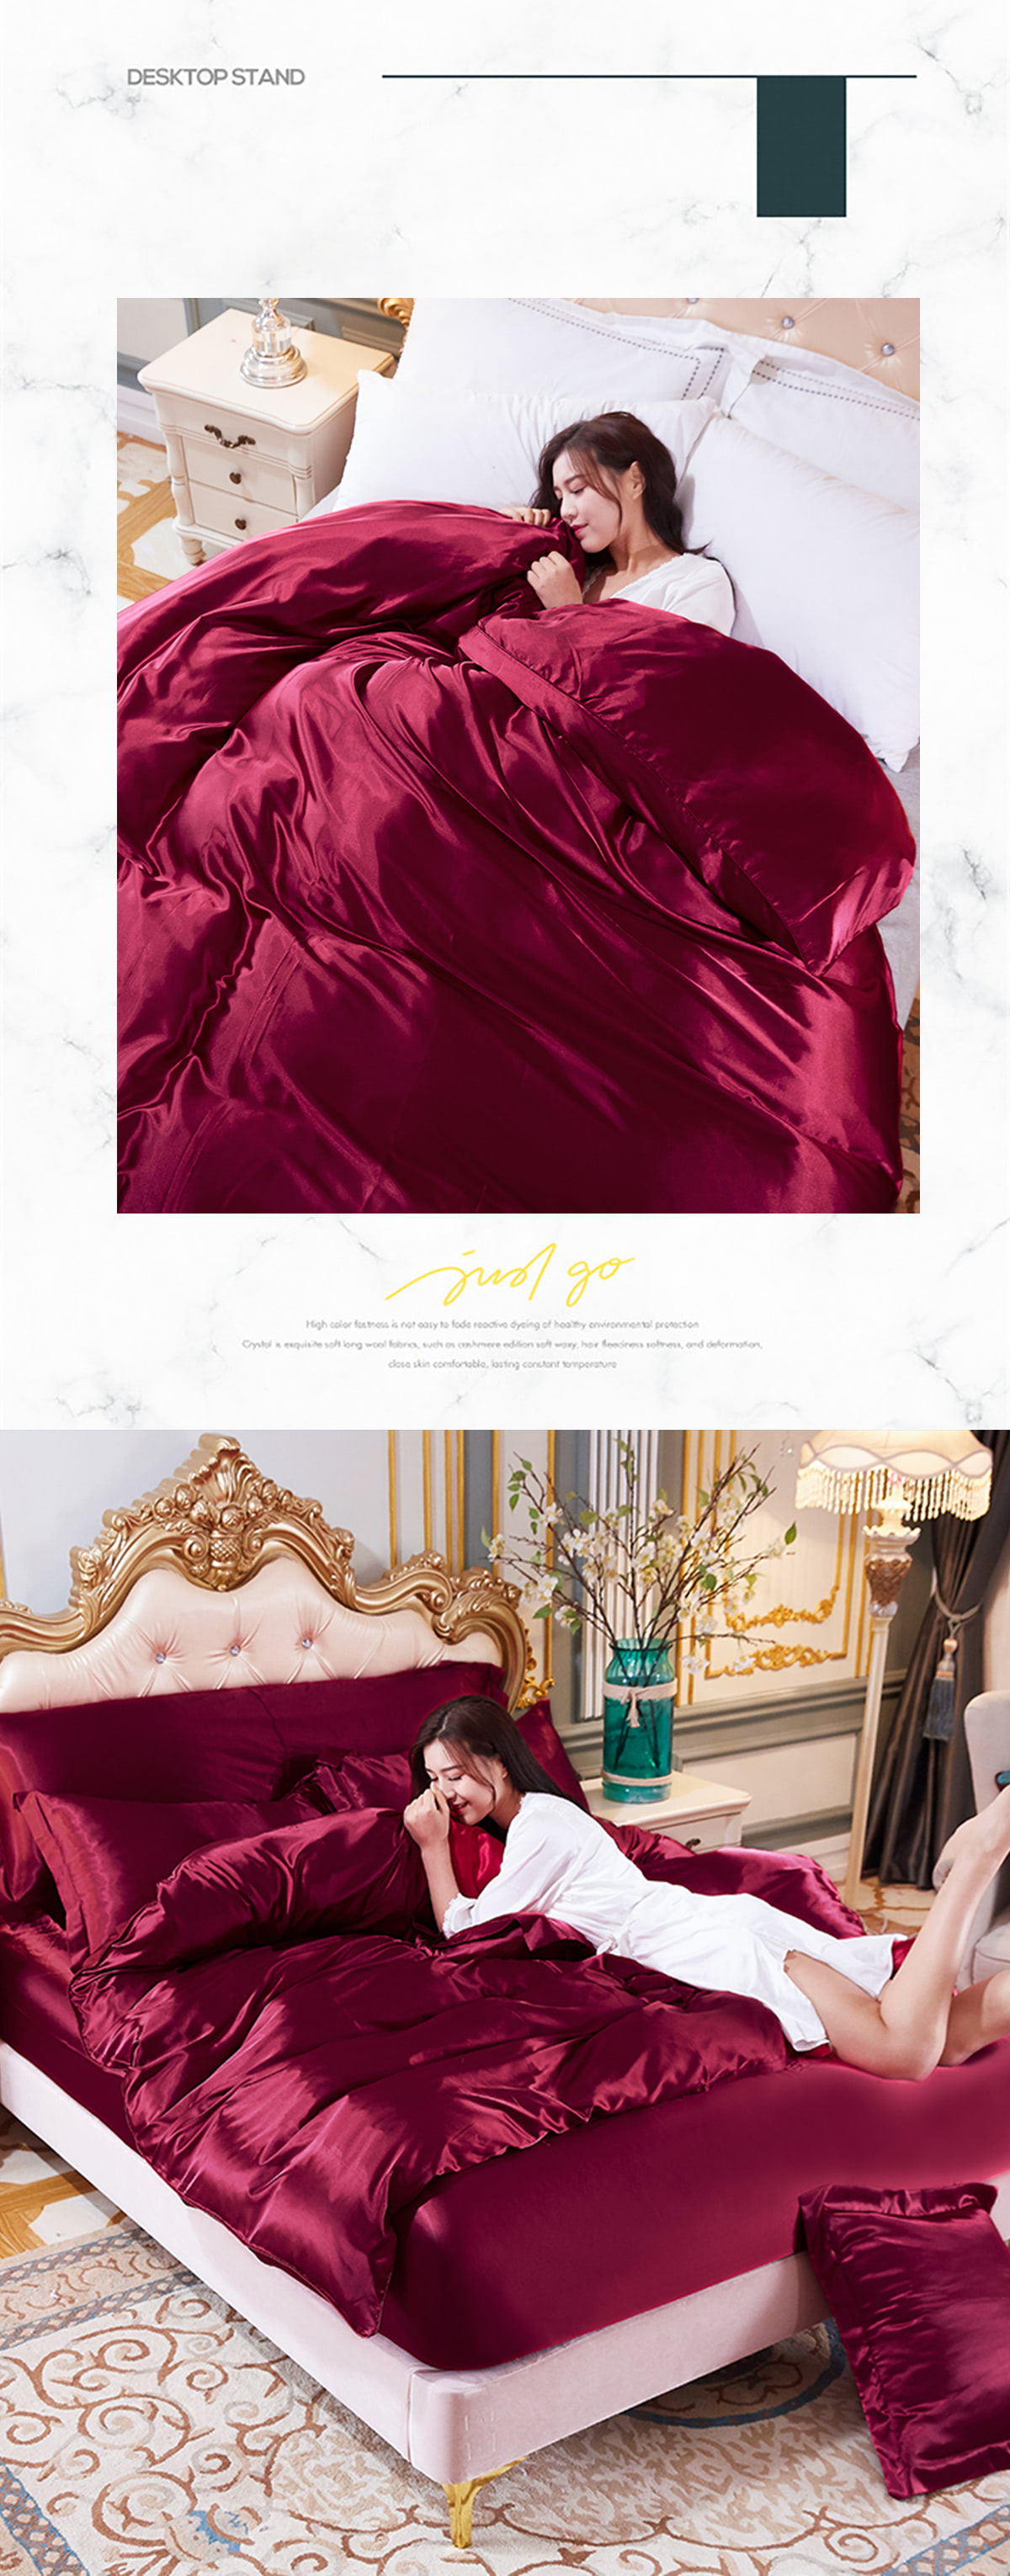 4-Piece-Soft-Silky-Satin-Solid-Color-Bed-Sheet-Pillowcases-Set27.jpg